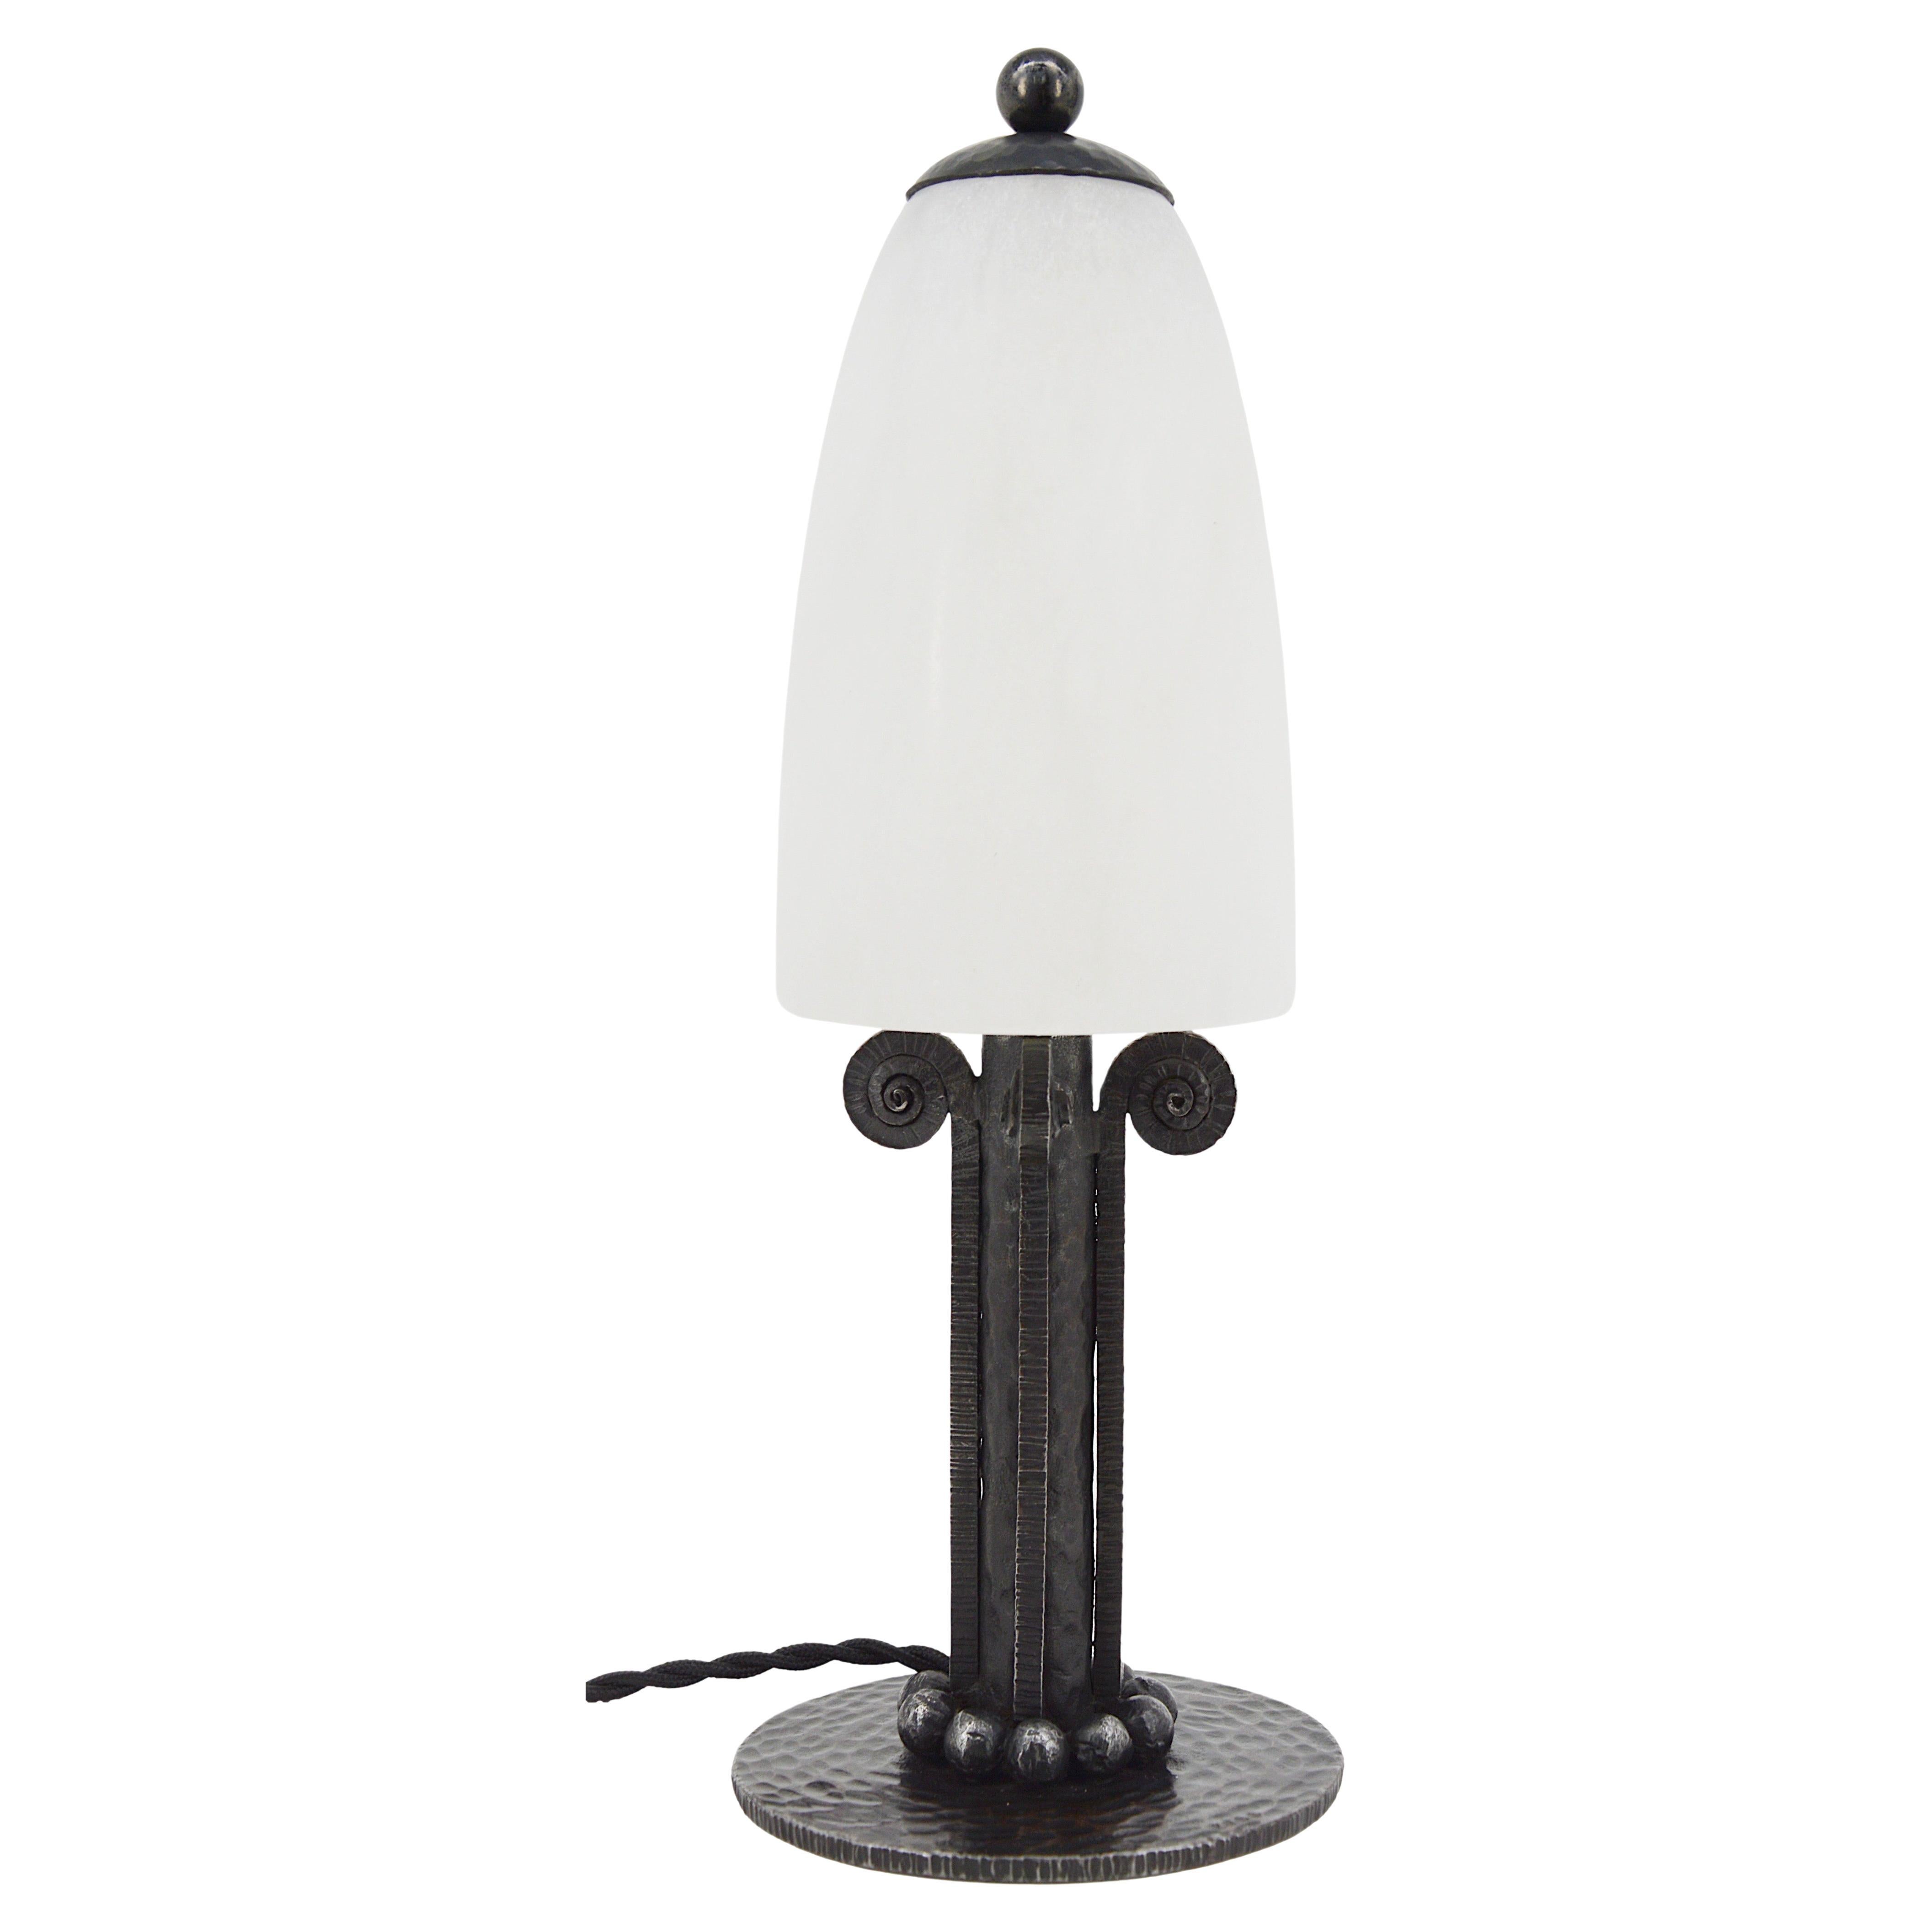 Paul Kiss French Art Deco Alabaster & Wrought-Iron Table Lamp, 1920s For Sale